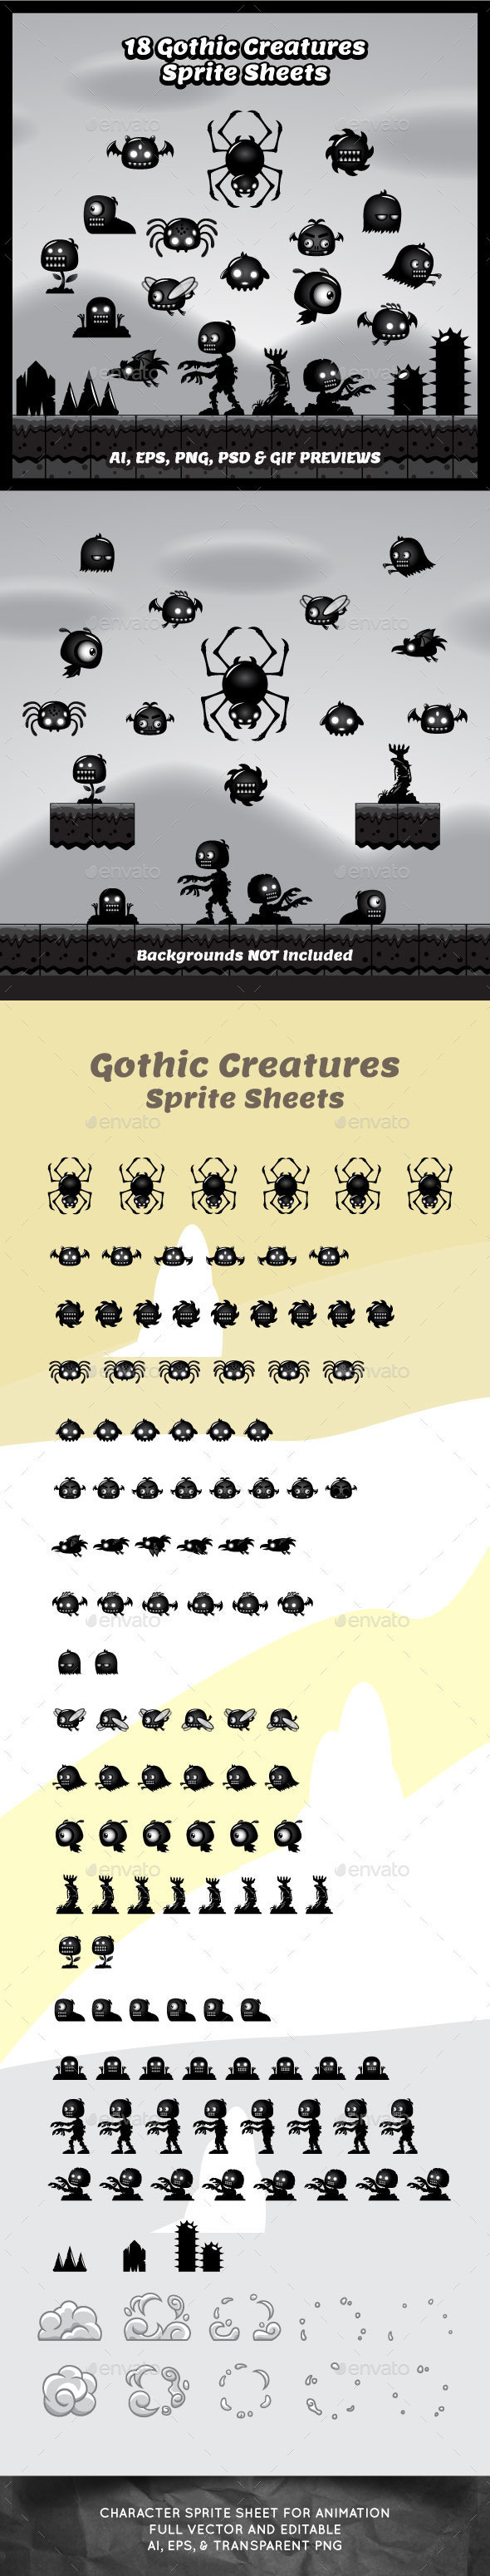 Gothic creatures limbo badlands creepy game character sprite sheet sidescroller game asset flying flappy animation gui mobile games gameart game art 590